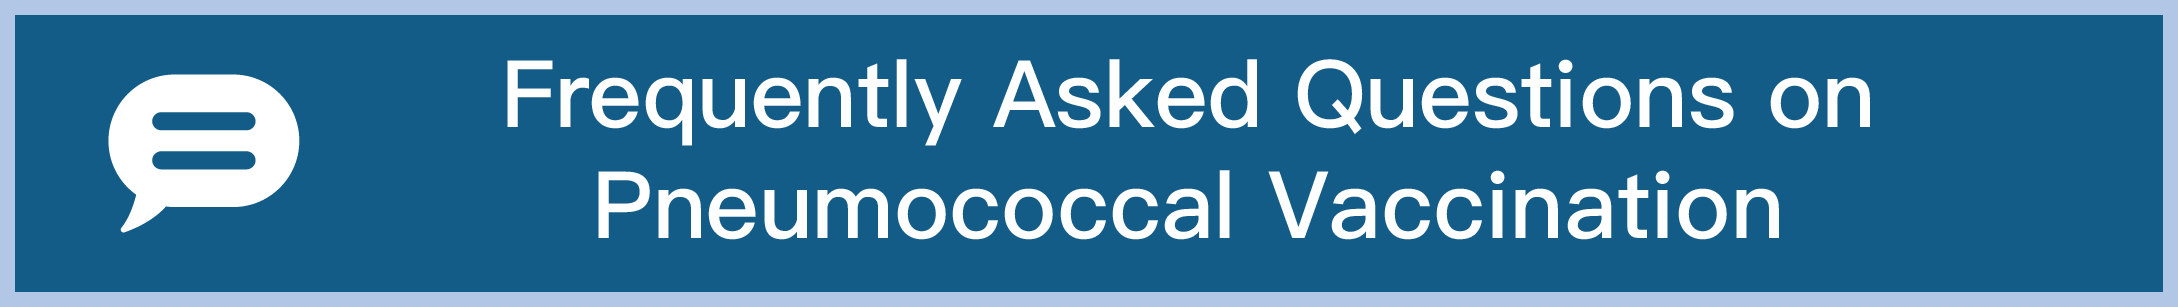 Frequently Asked Questions on Pneumococcal Vaccination